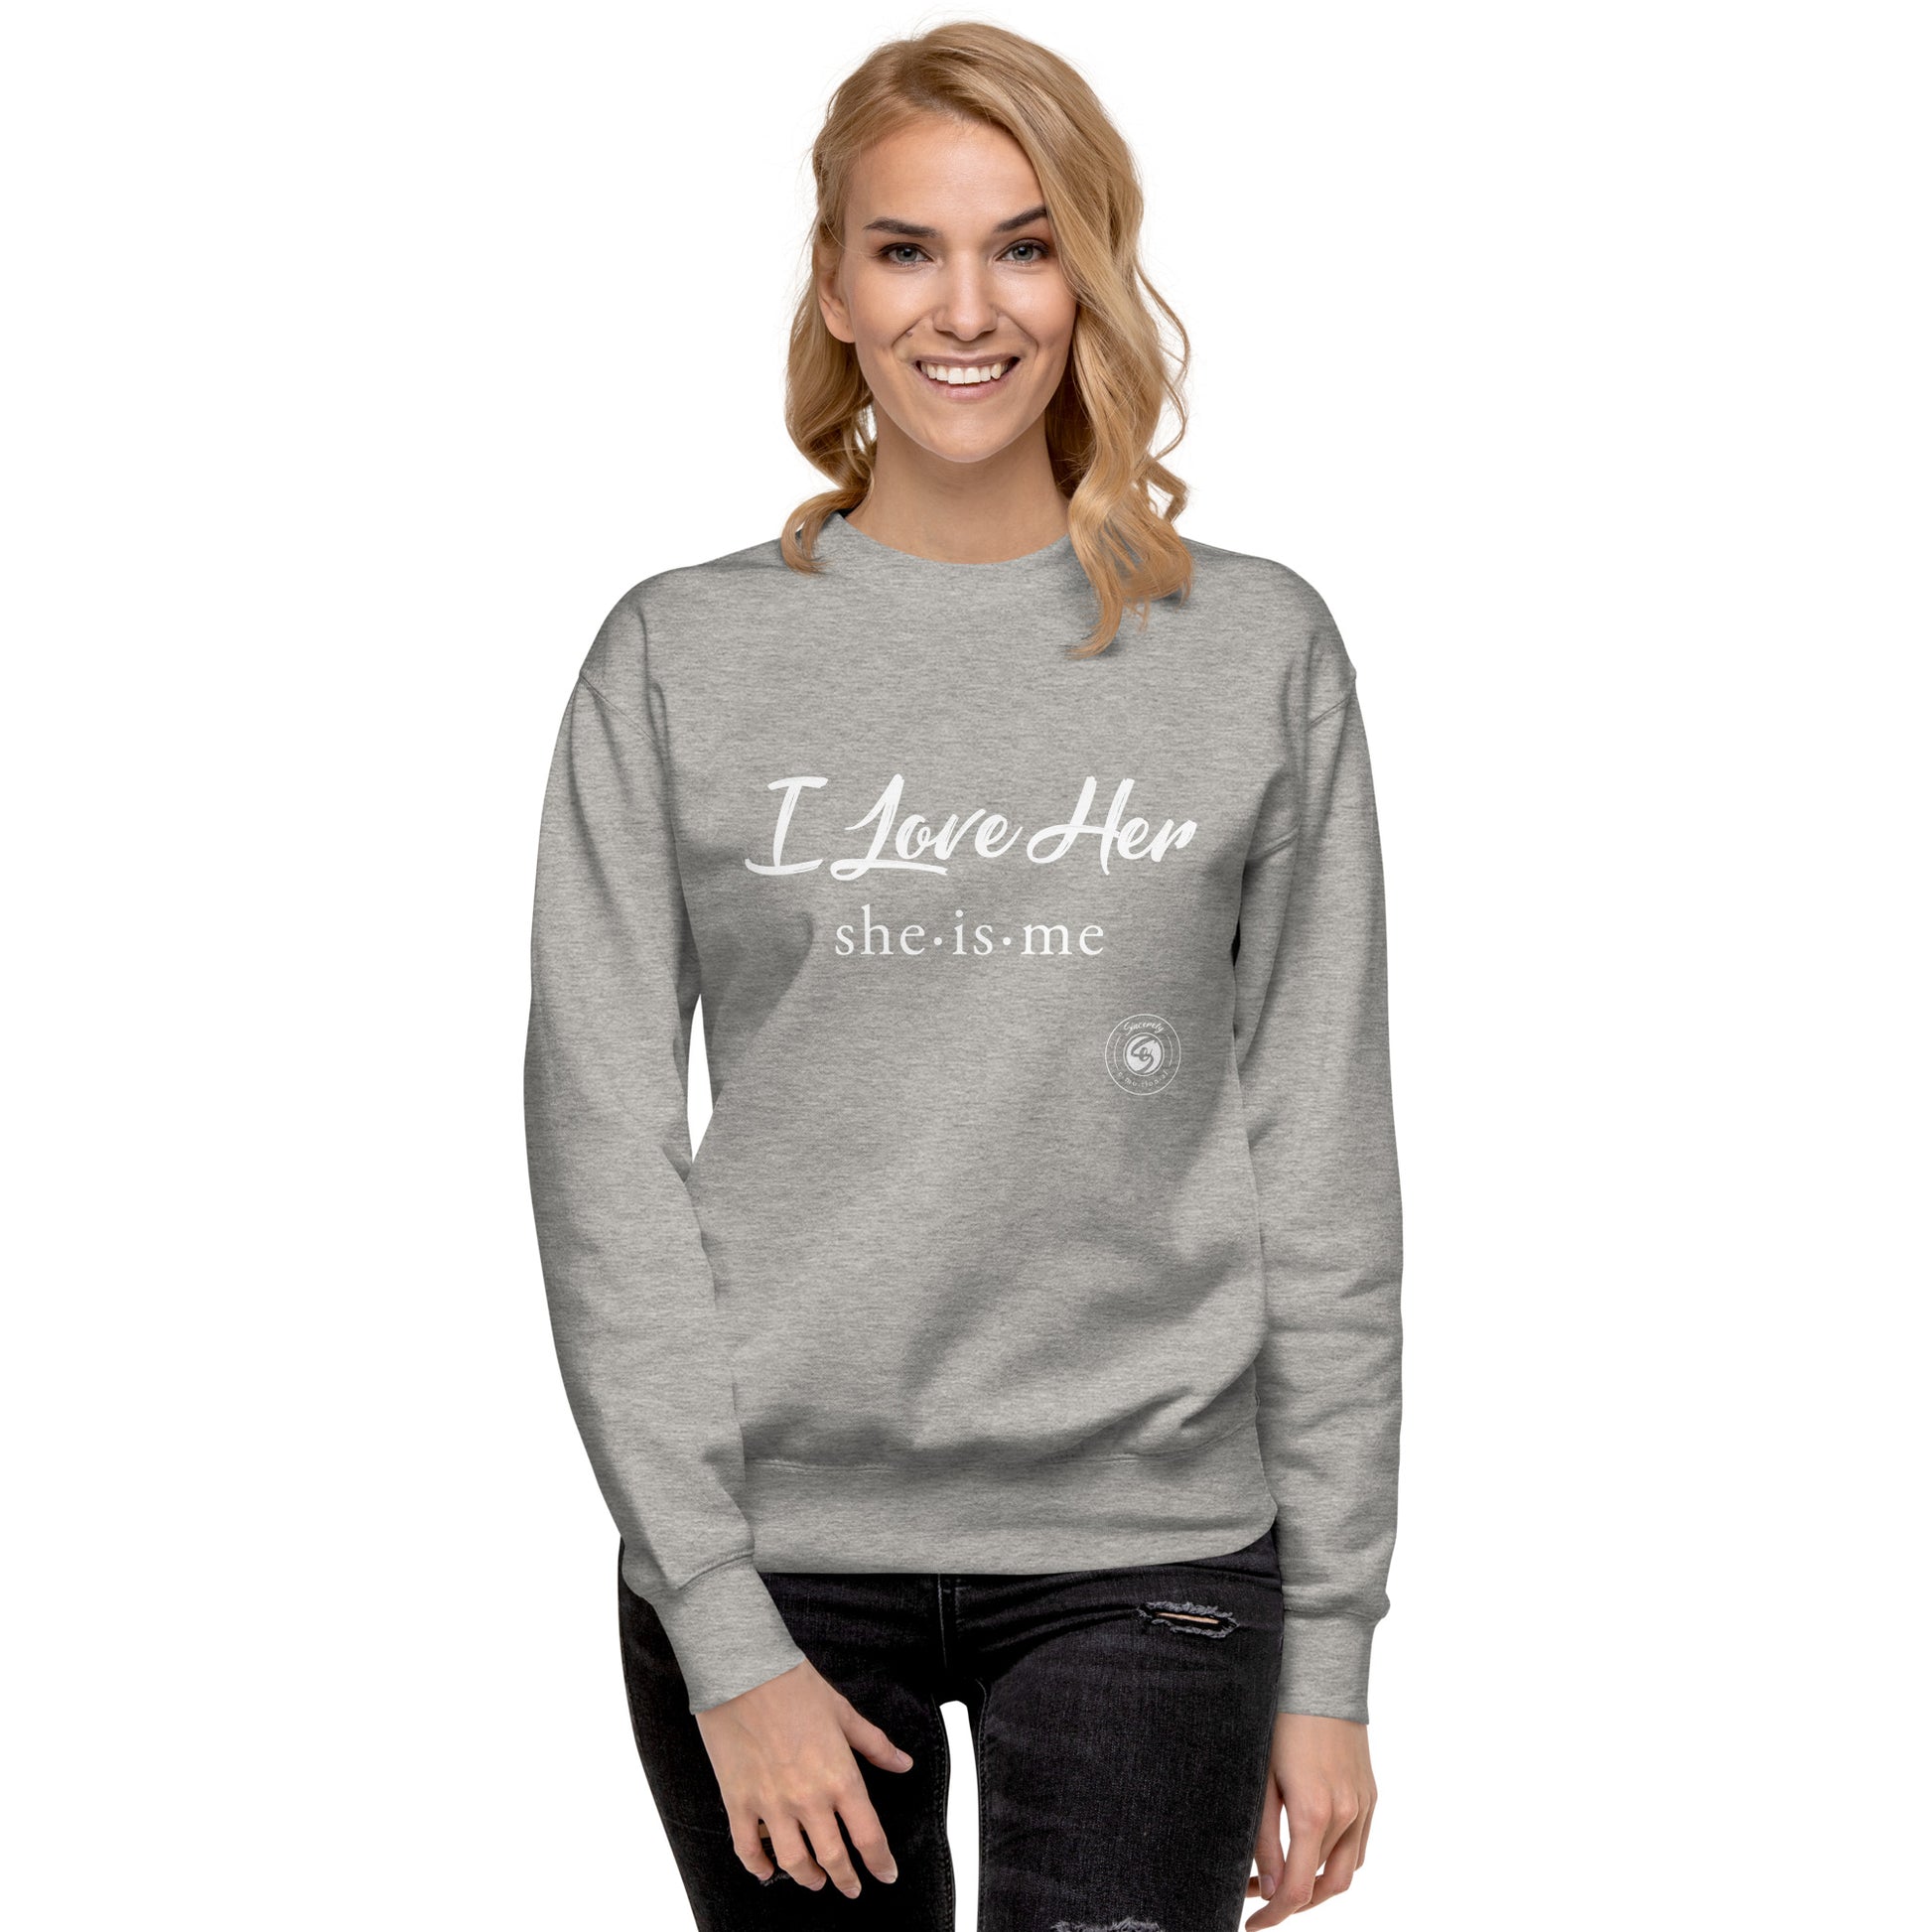 I love me sweater, Collection 2022